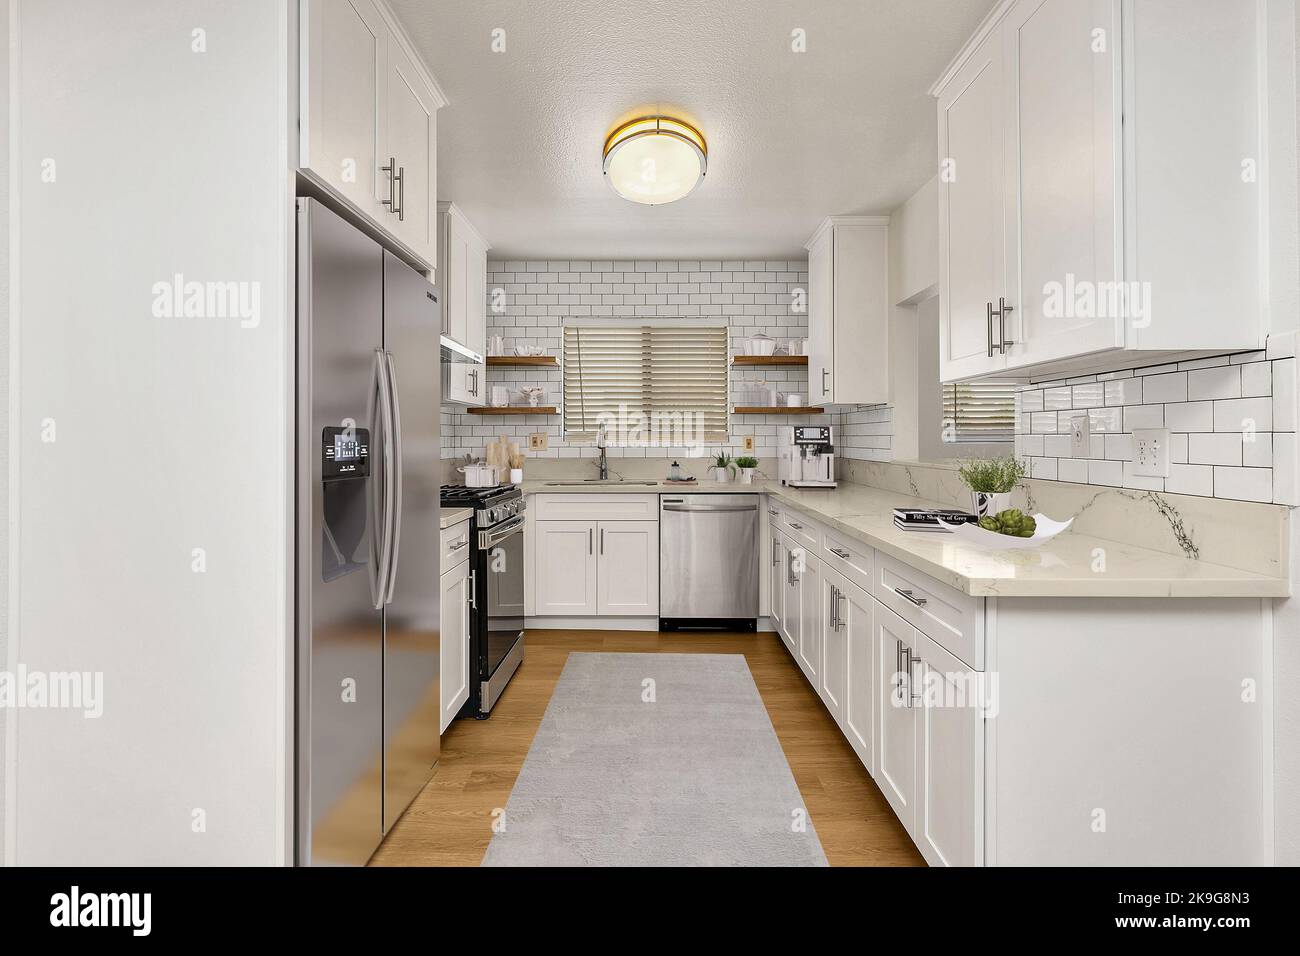 Kitchen Detail in Newly Home with hardwood floors, gray carpet, stainless steel refrigerator, black microwave, and quartz counters. 3D illustration. Stock Photo